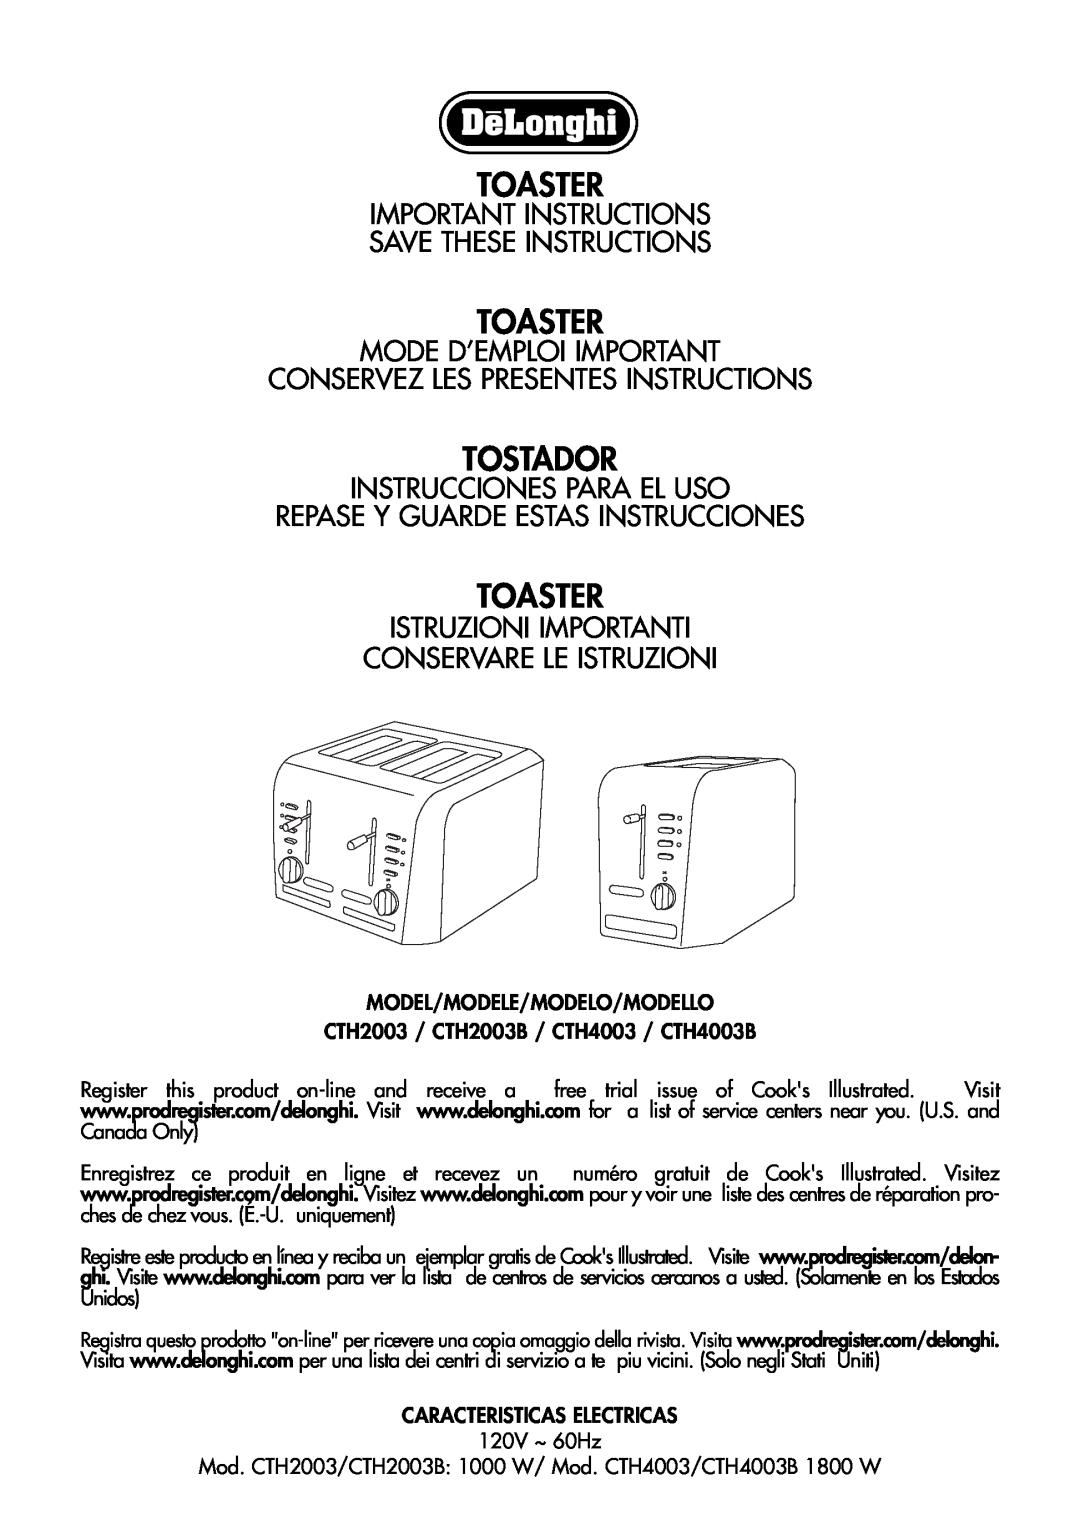 DeLonghi CTH2003B manual Toaster, Tostador, Important Instructions Save These Instructions, Mode D’Emploi Important 